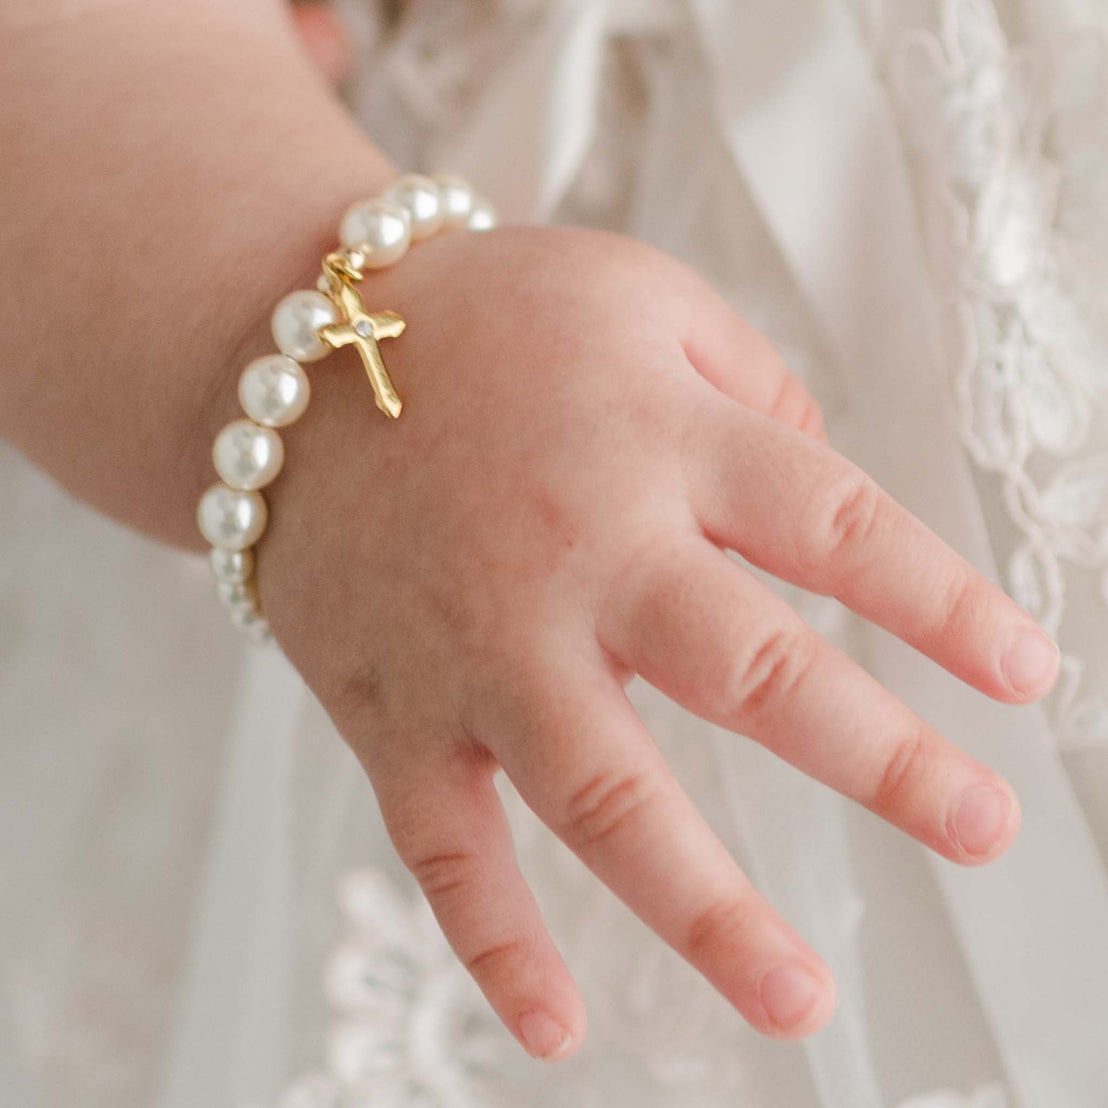 Close detail of Cream Luster Pearl Bracelet with Gold Cross on a baby girl's wrist.